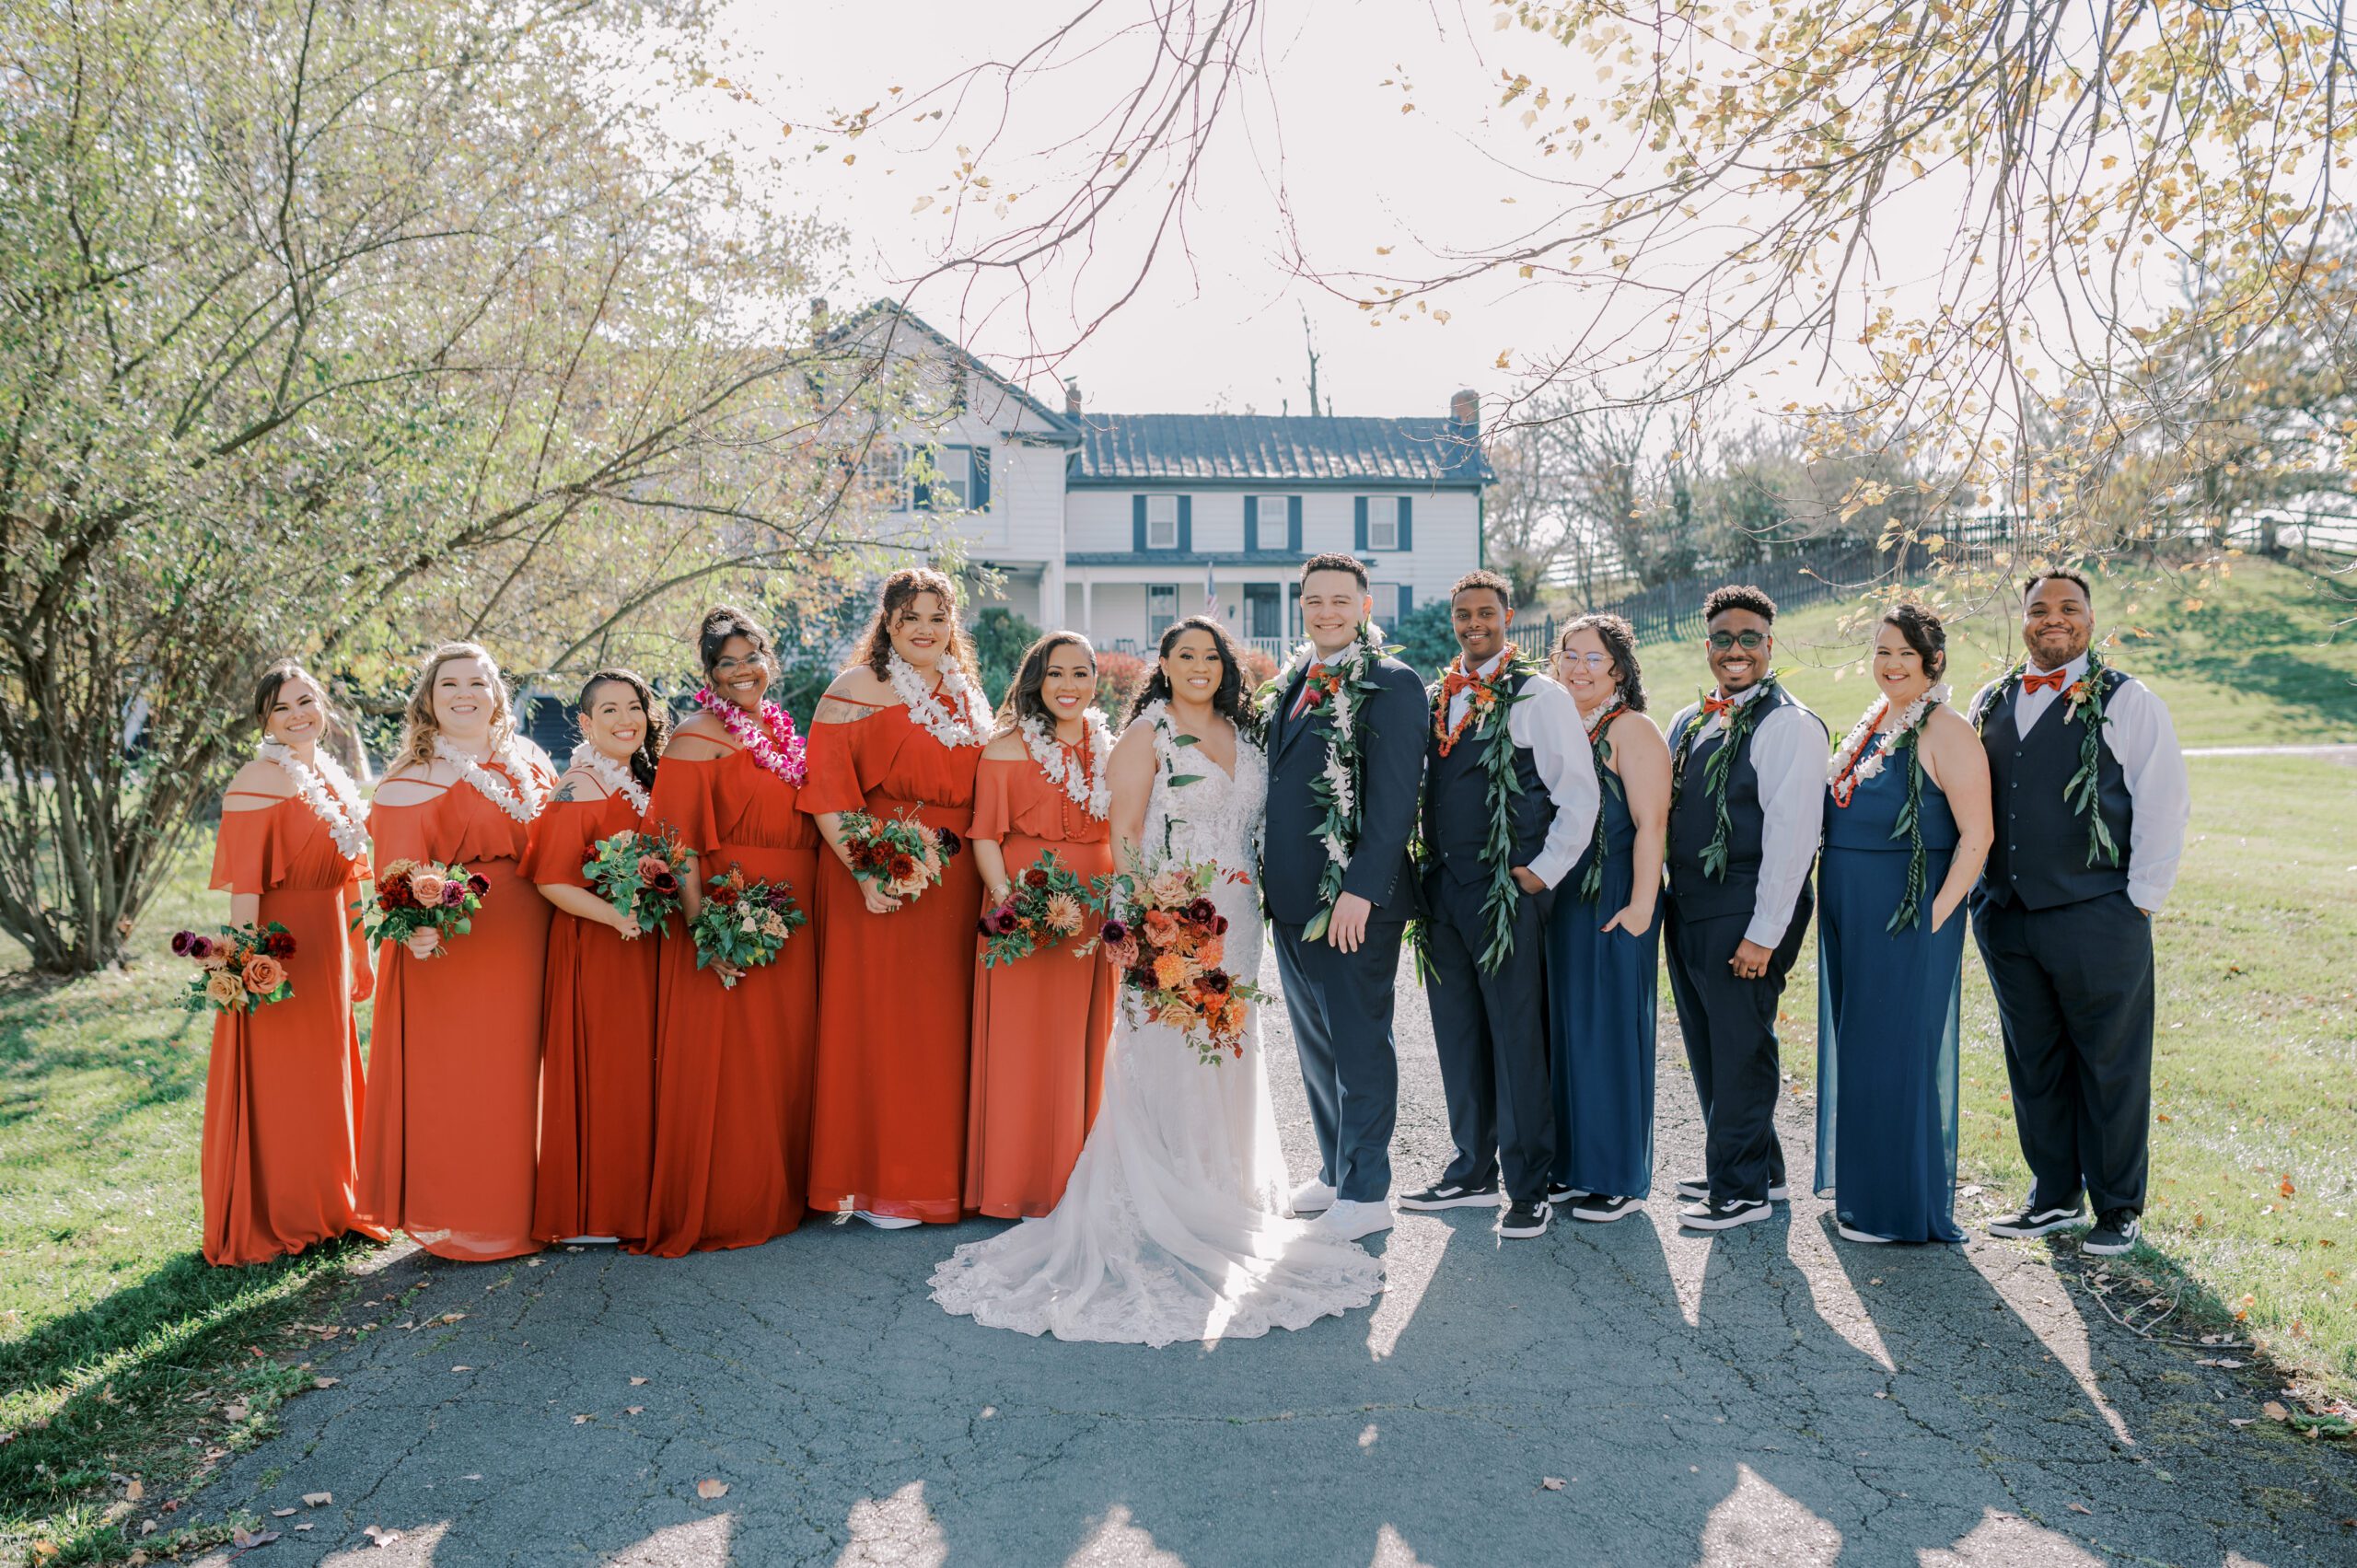 Outdoor group photo of couple with wedding party, all smiling and facing the camerg while wearing leis